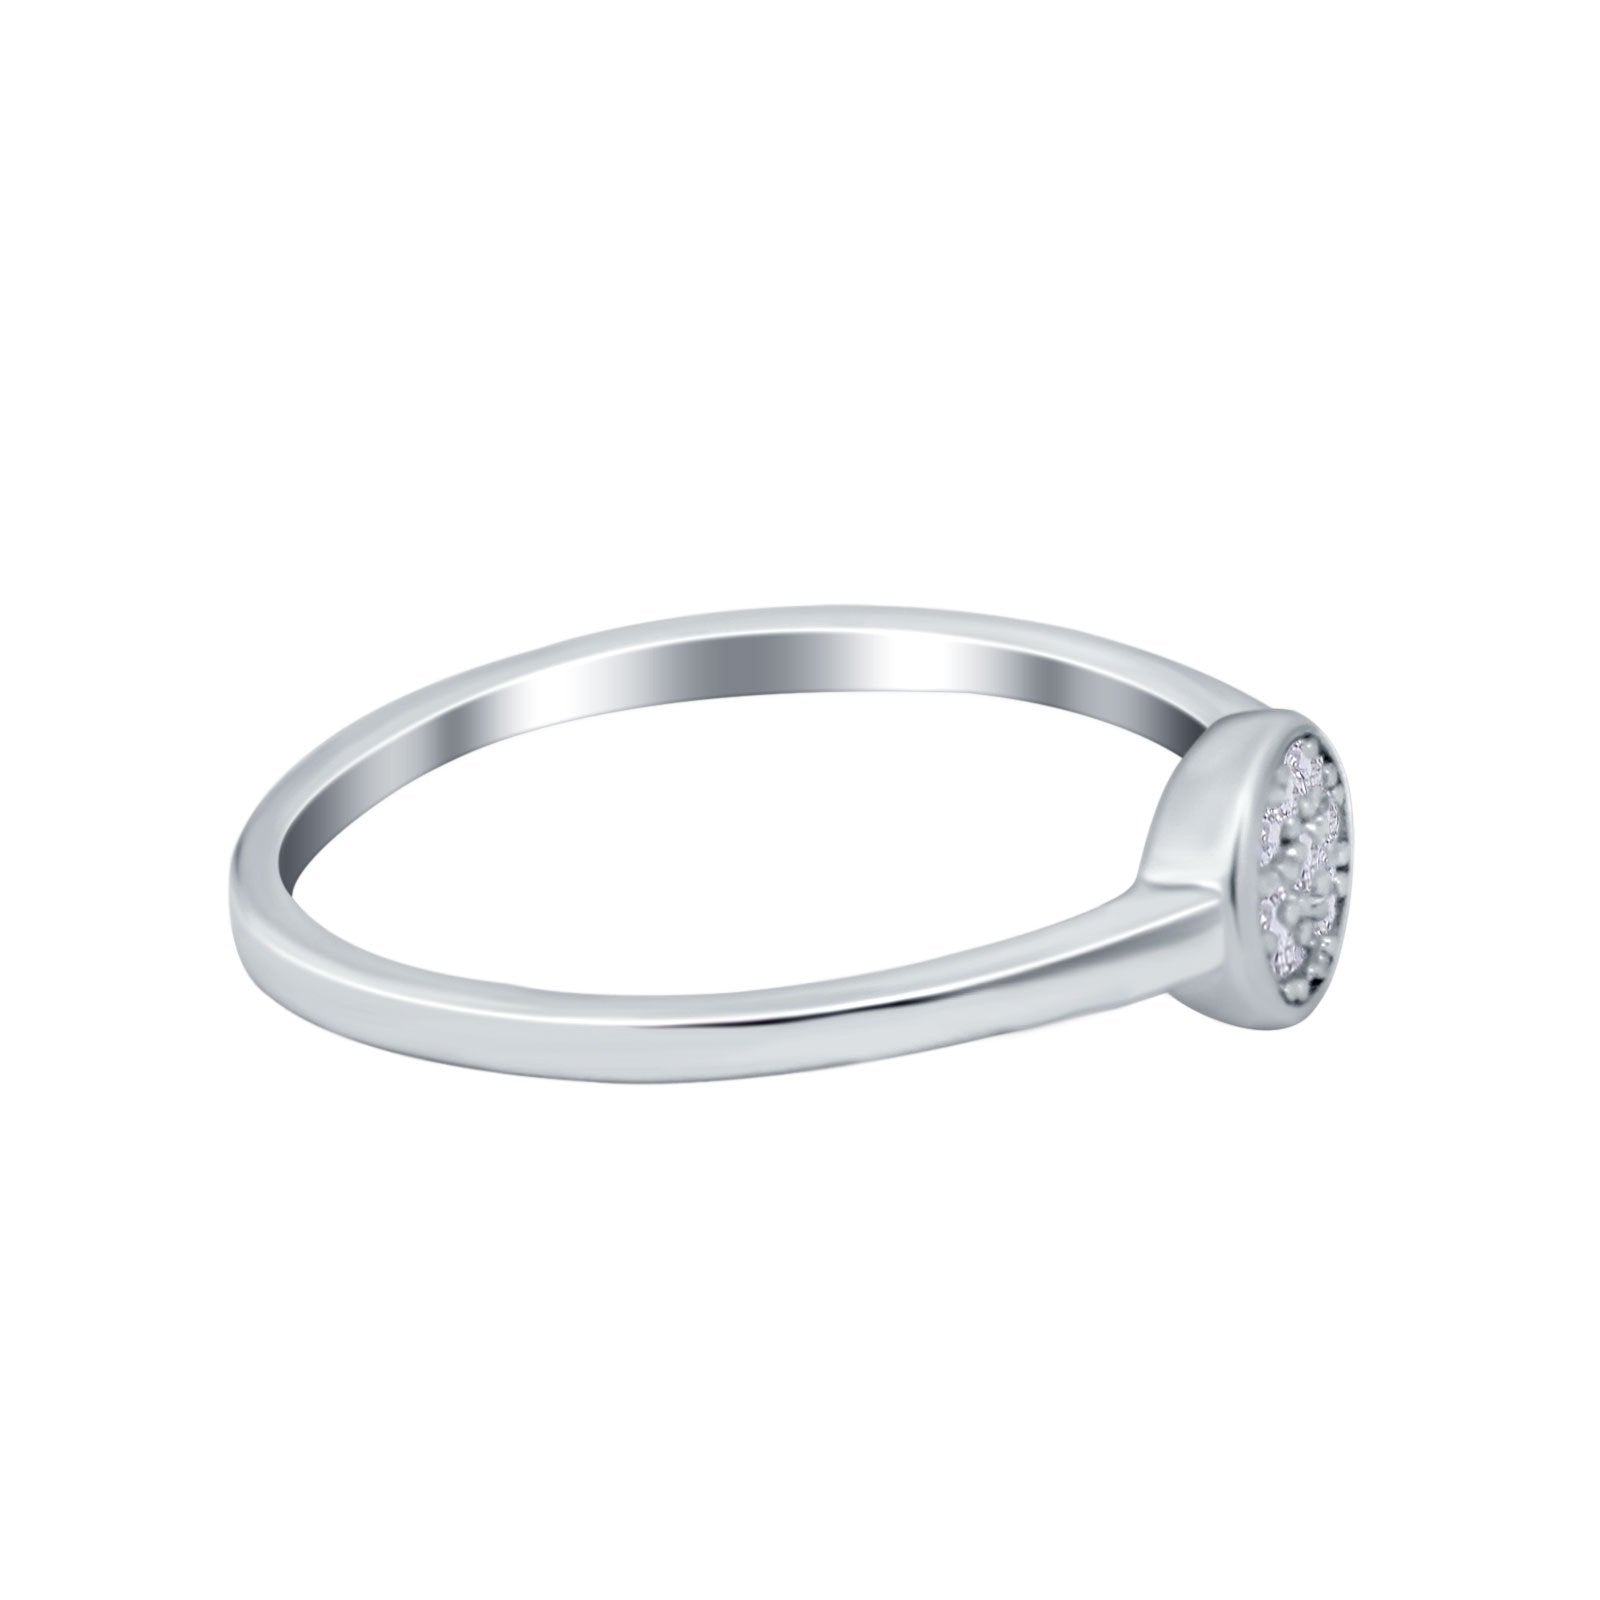 Petite Dainty Thumb Ring Pave Round Simulated Cubic Zirconia 925 Sterling Silver